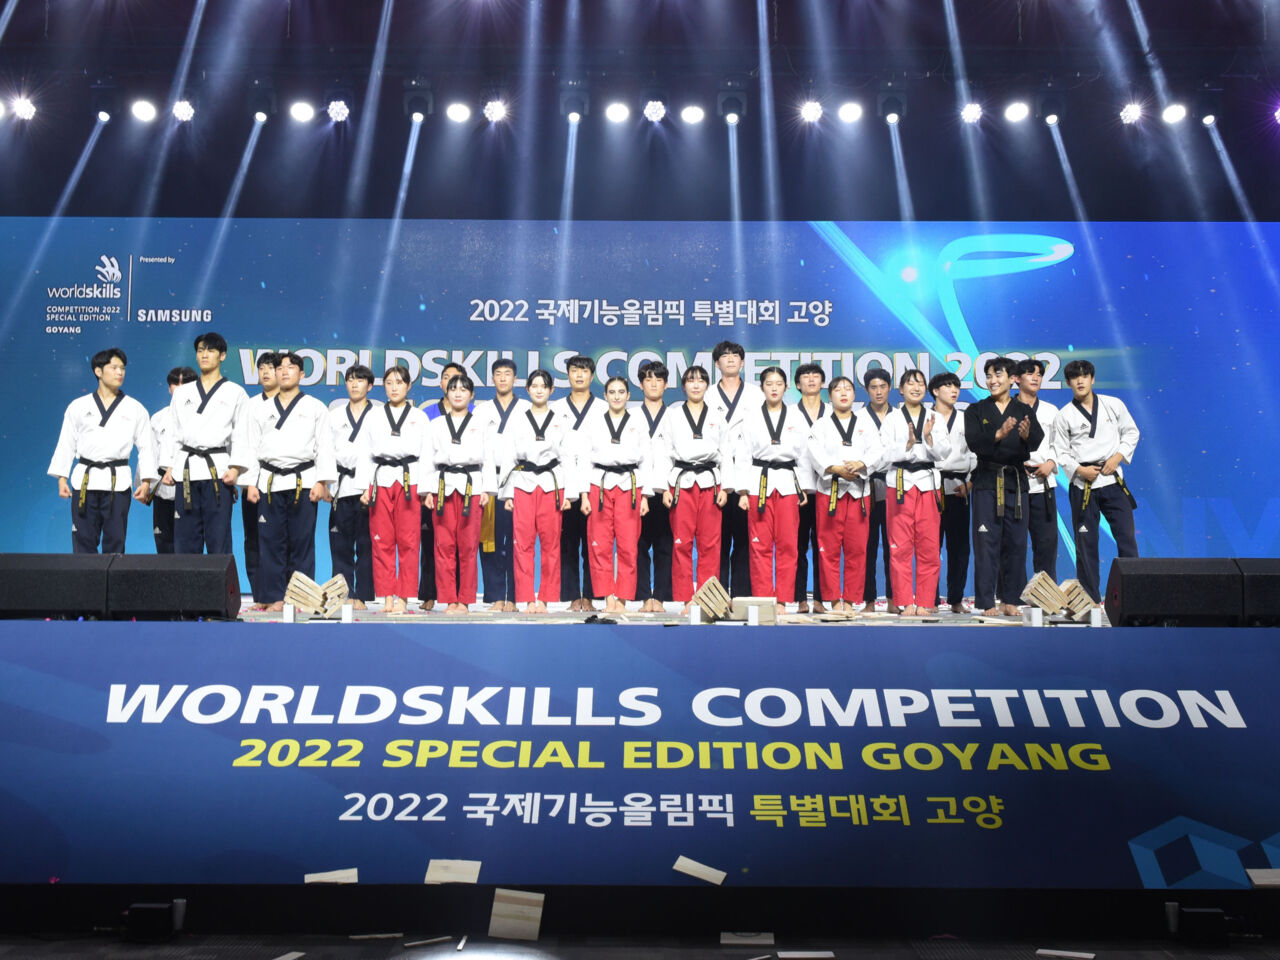 A Taekwondo martial arts demonstration during the Opening Ceremony of WorldSkills Competition 2022 Special Edition at the Kintex Exhibition Hall in Goyang, Korea.
